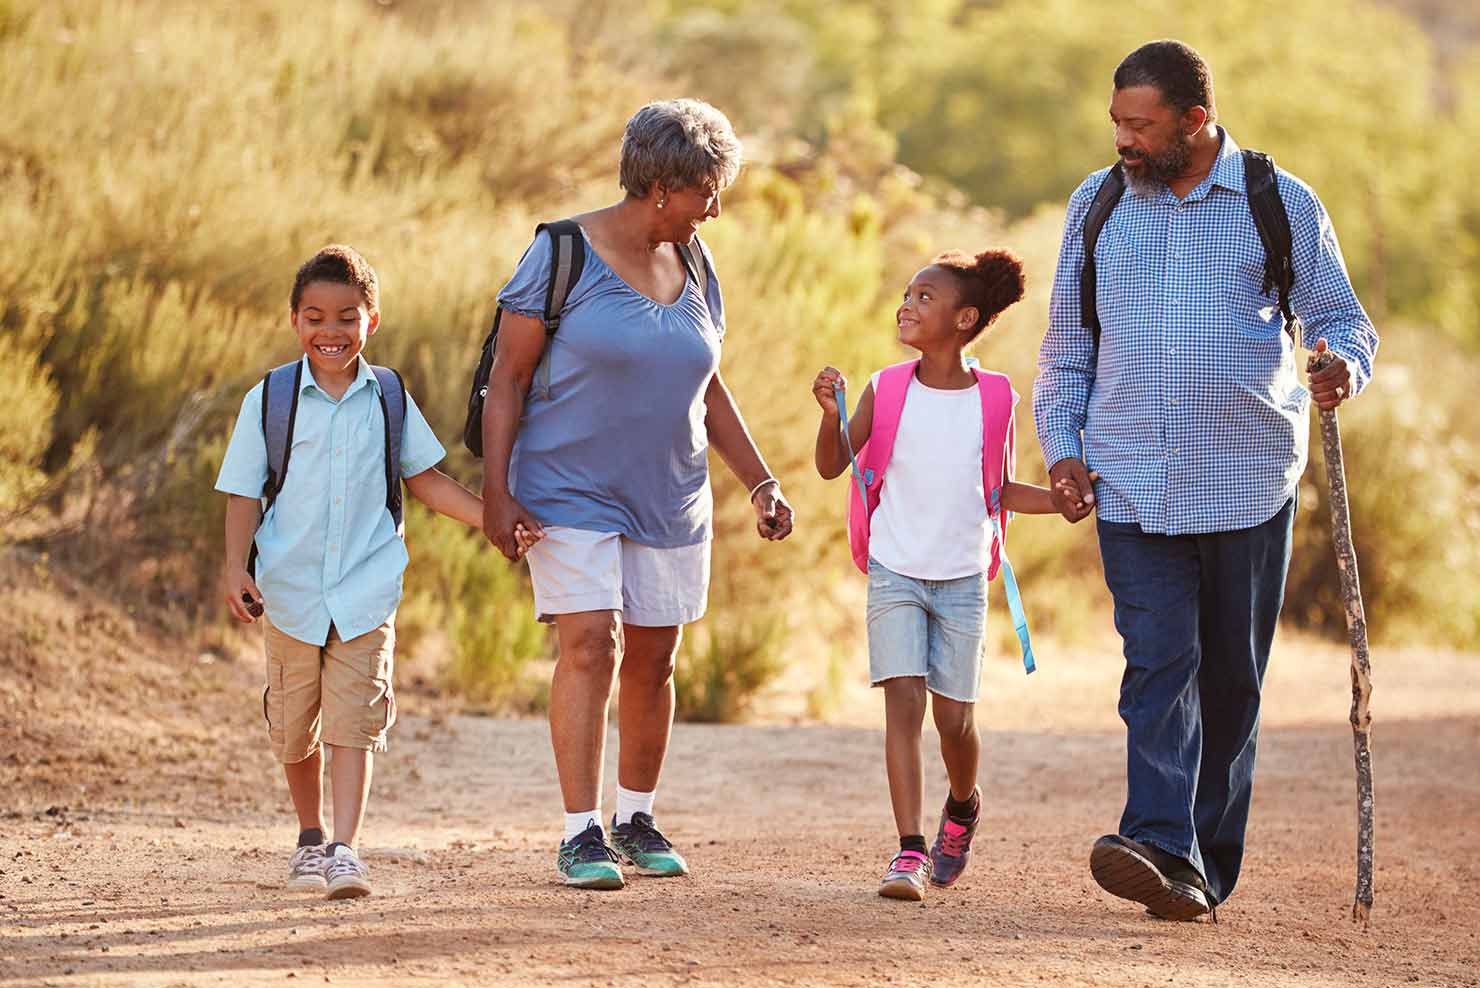 grandparents hiking with their grandkids life insurance options fort worth tx